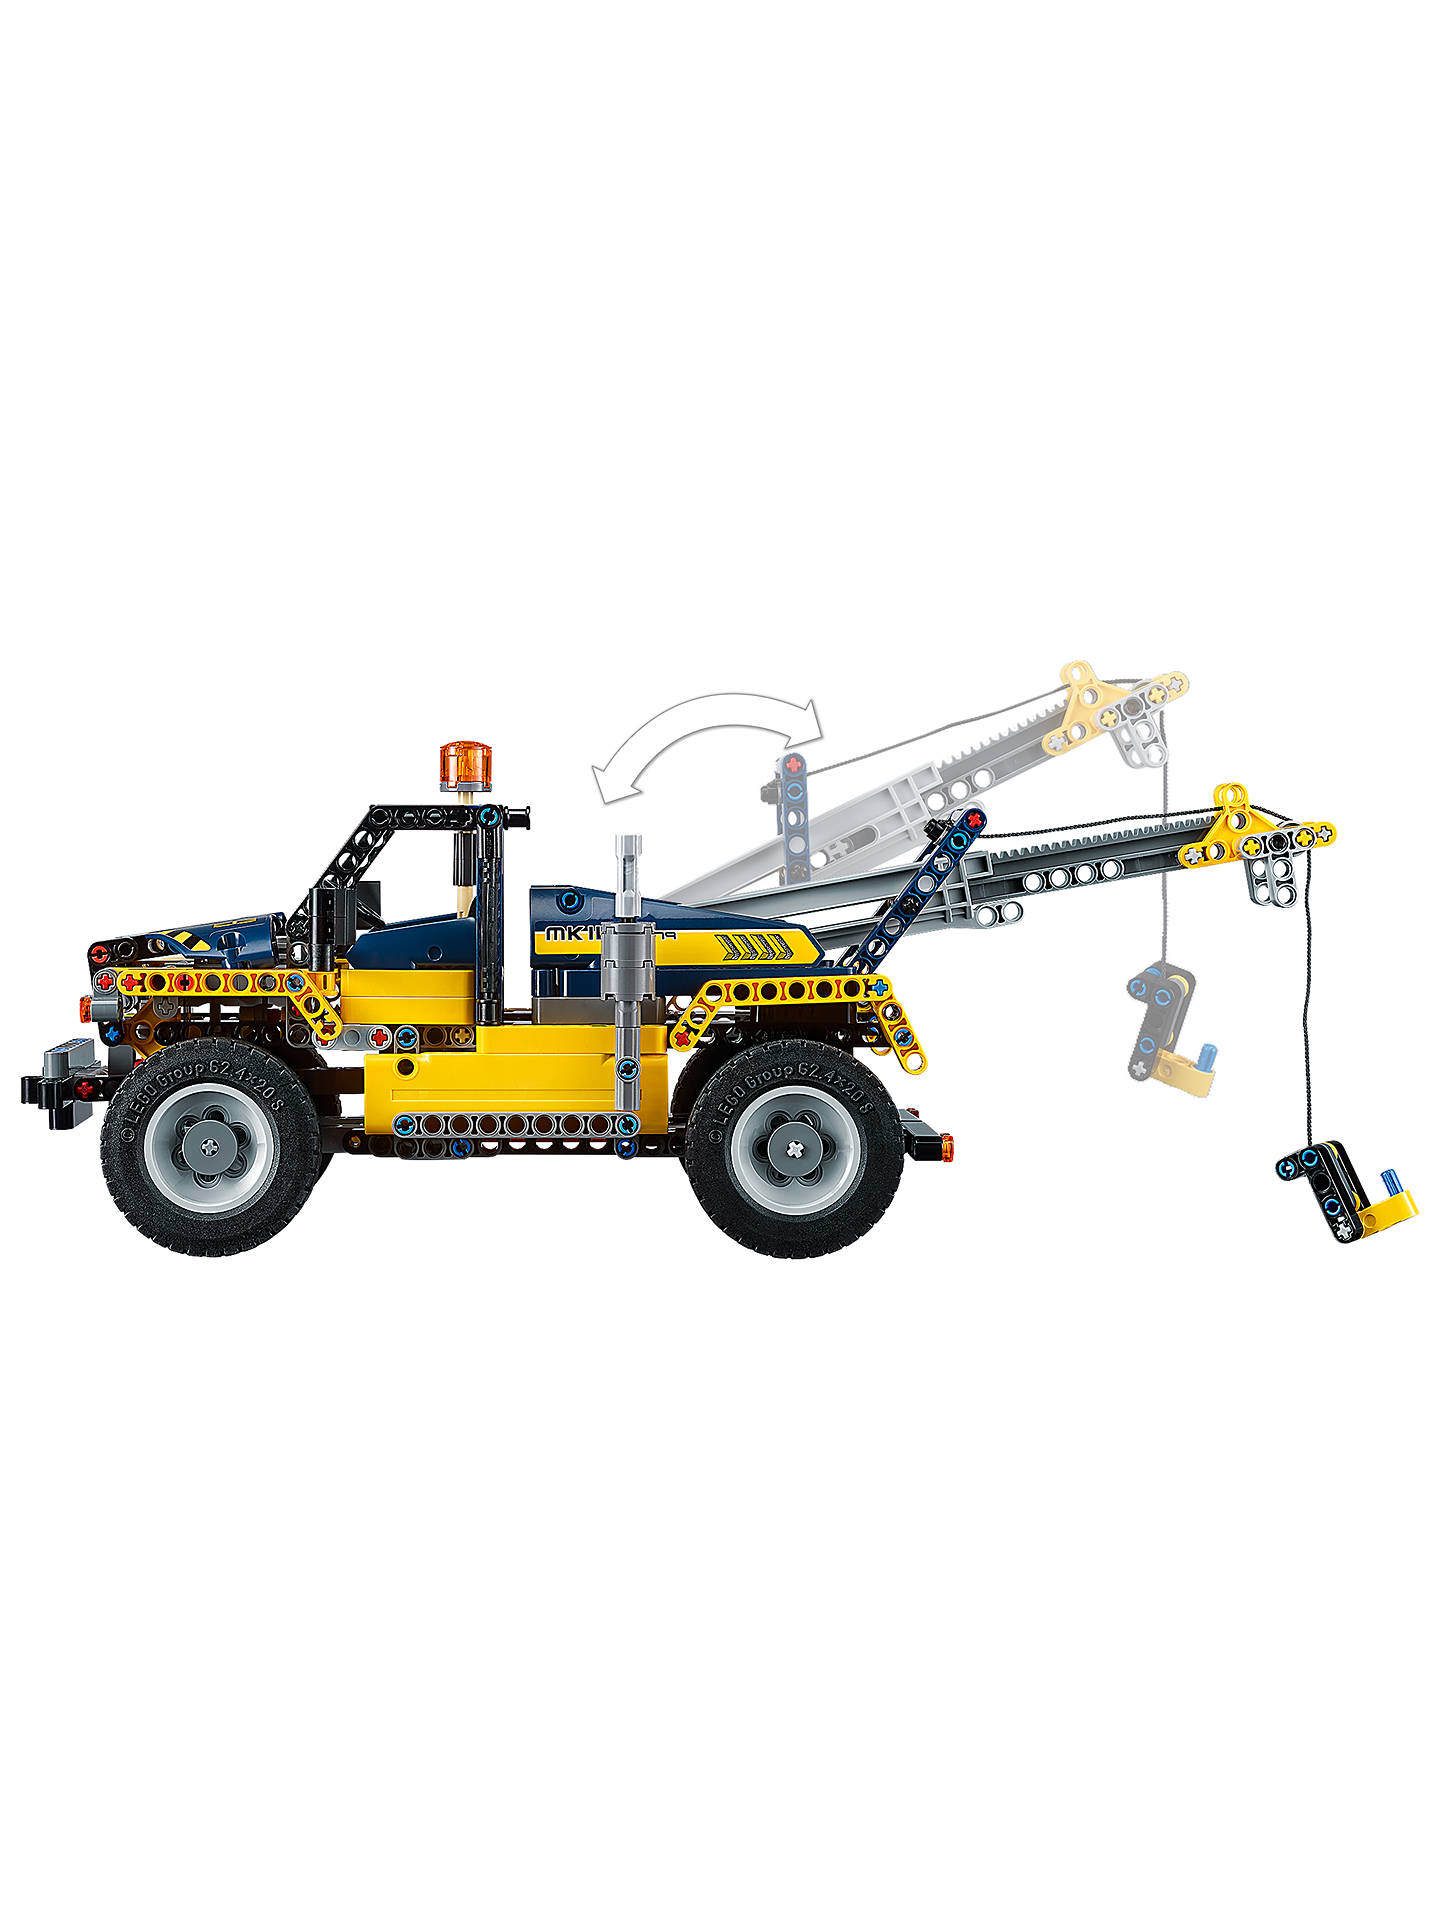 Lego Technic 42079 2 In 1 Heavy Duty Forklift At John Lewis Partners